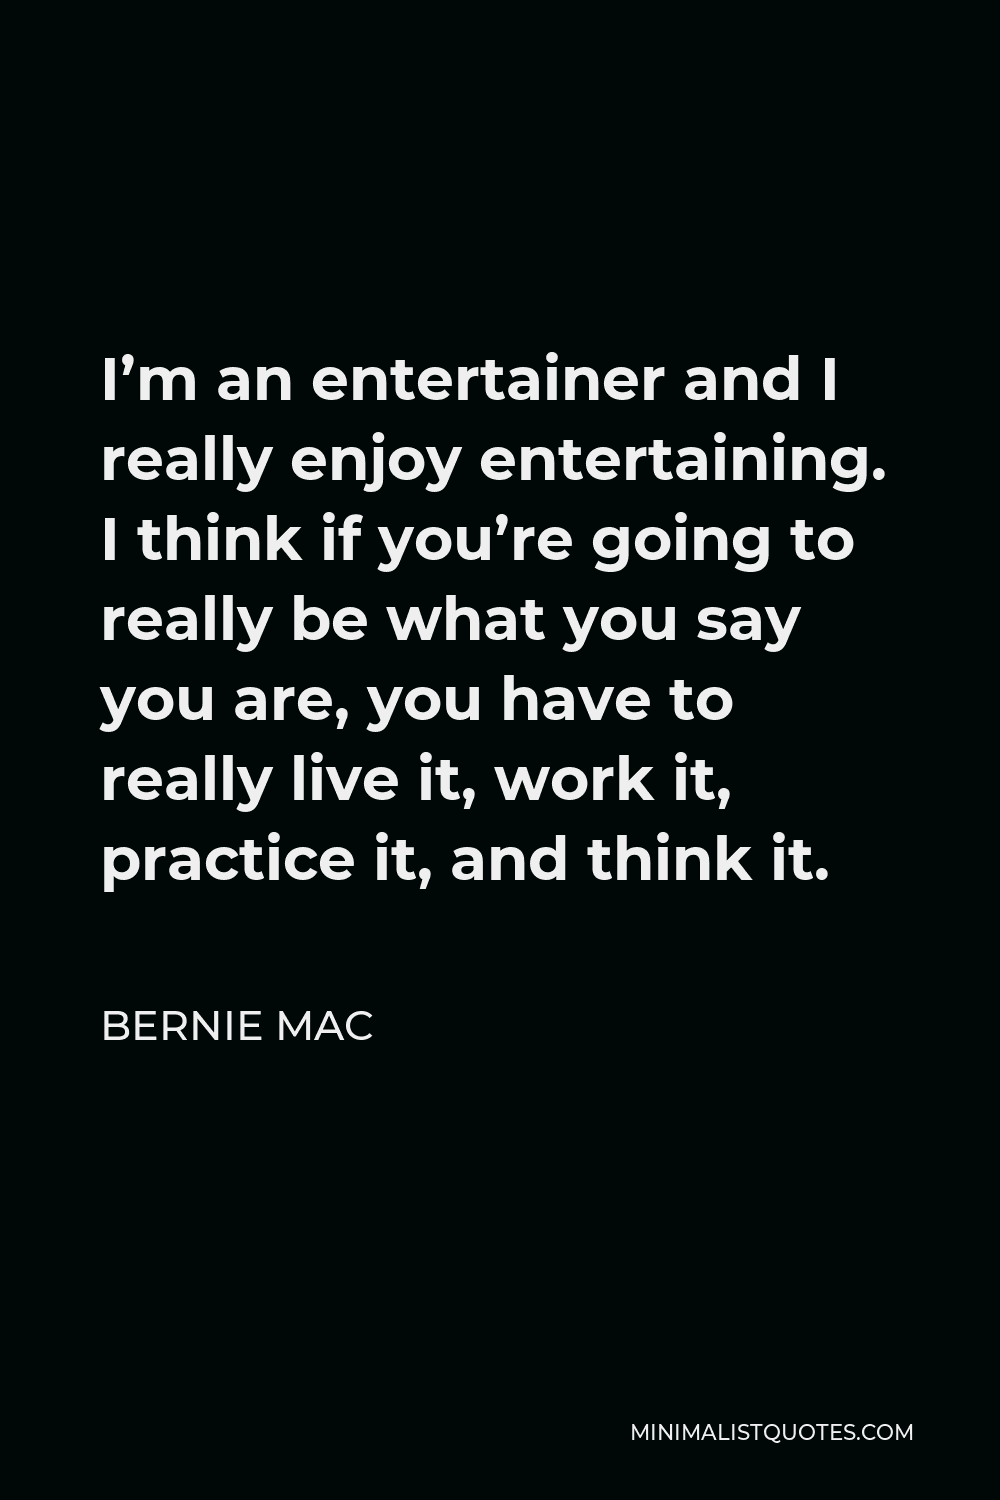 Bernie Mac Quote - I’m an entertainer and I really enjoy entertaining. I think if you’re going to really be what you say you are, you have to really live it, work it, practice it, and think it.